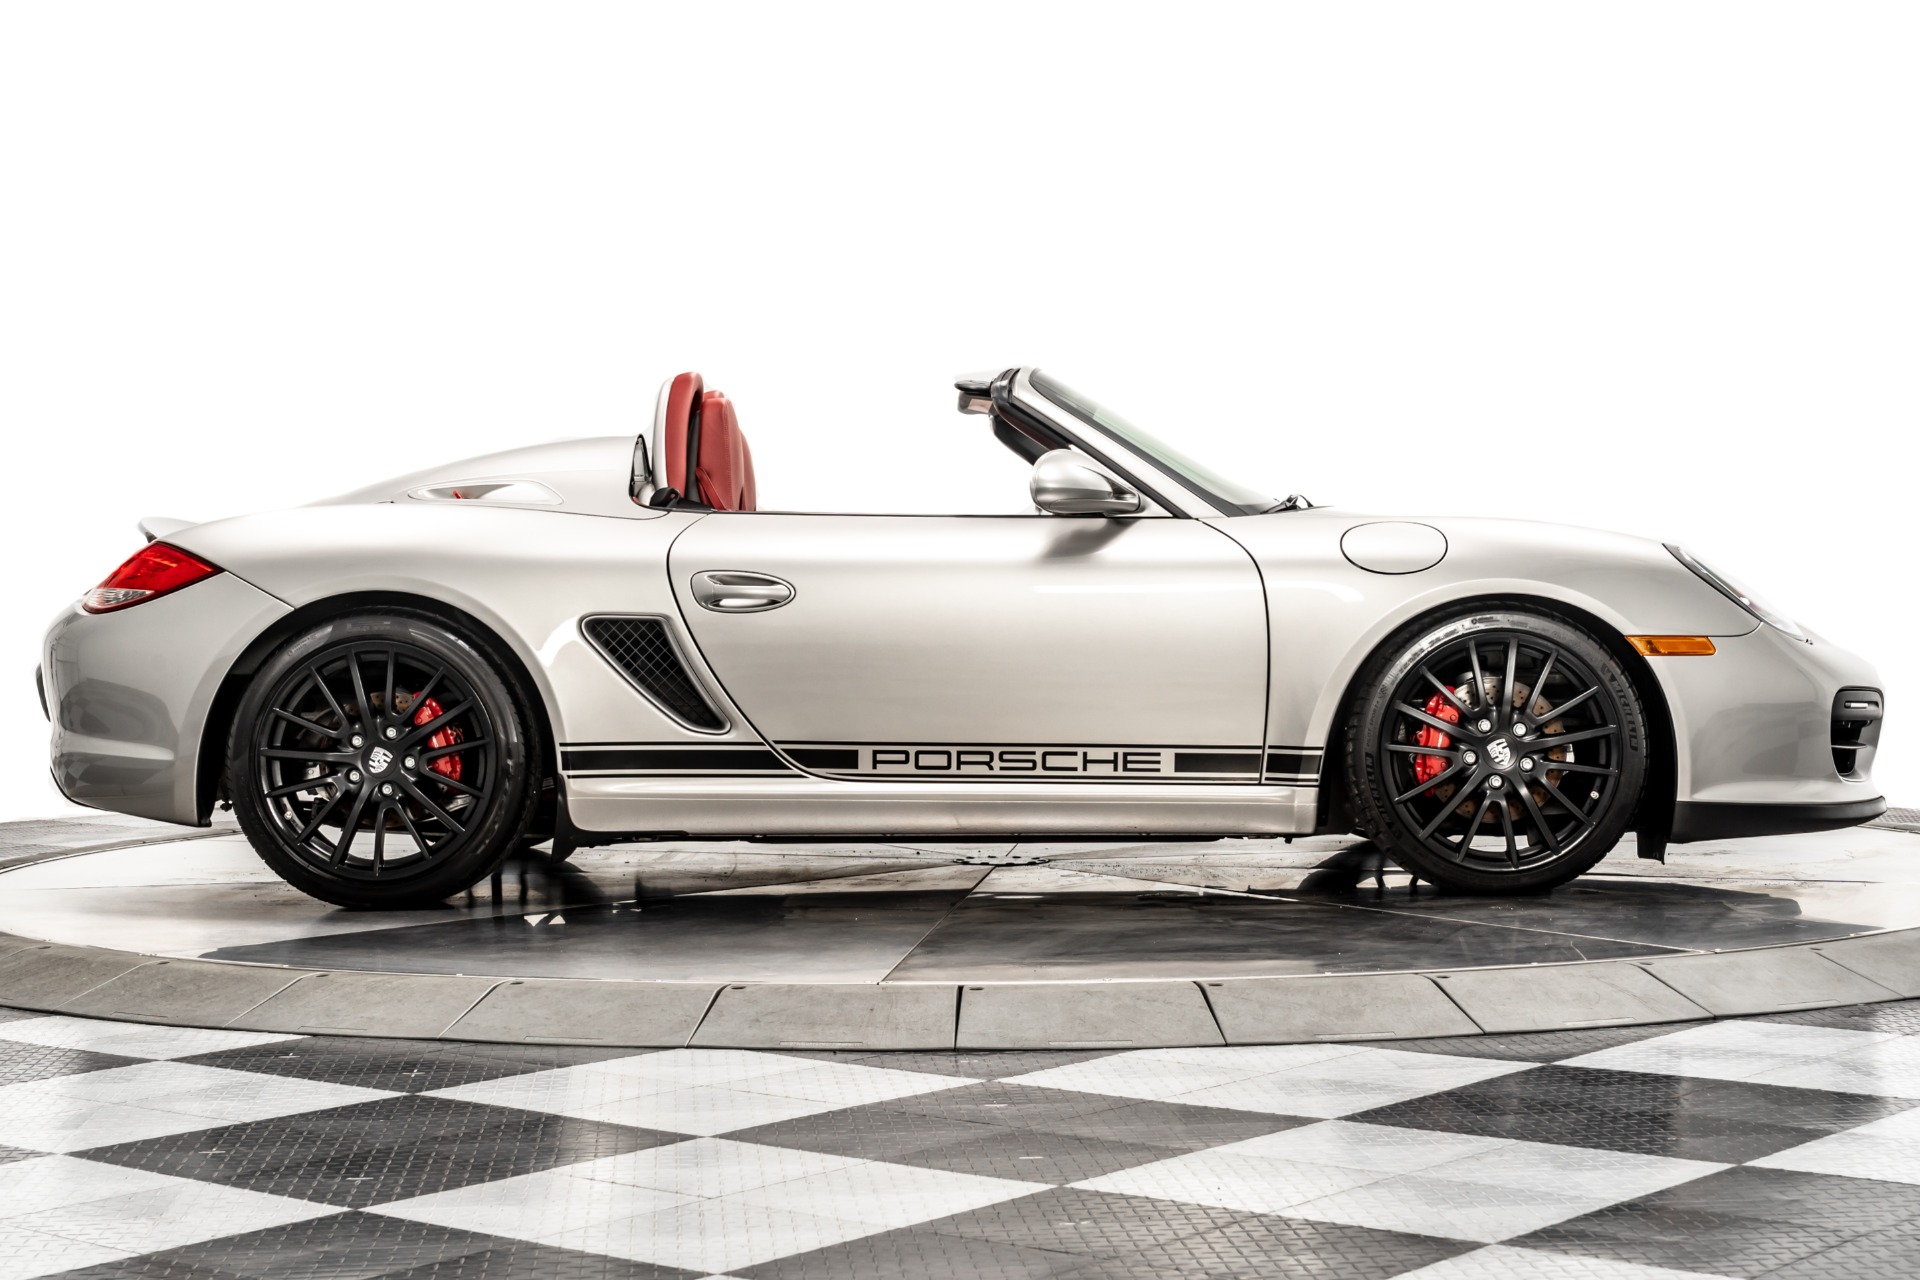 Used 2012 Porsche Boxster Spyder For Sale (Sold)